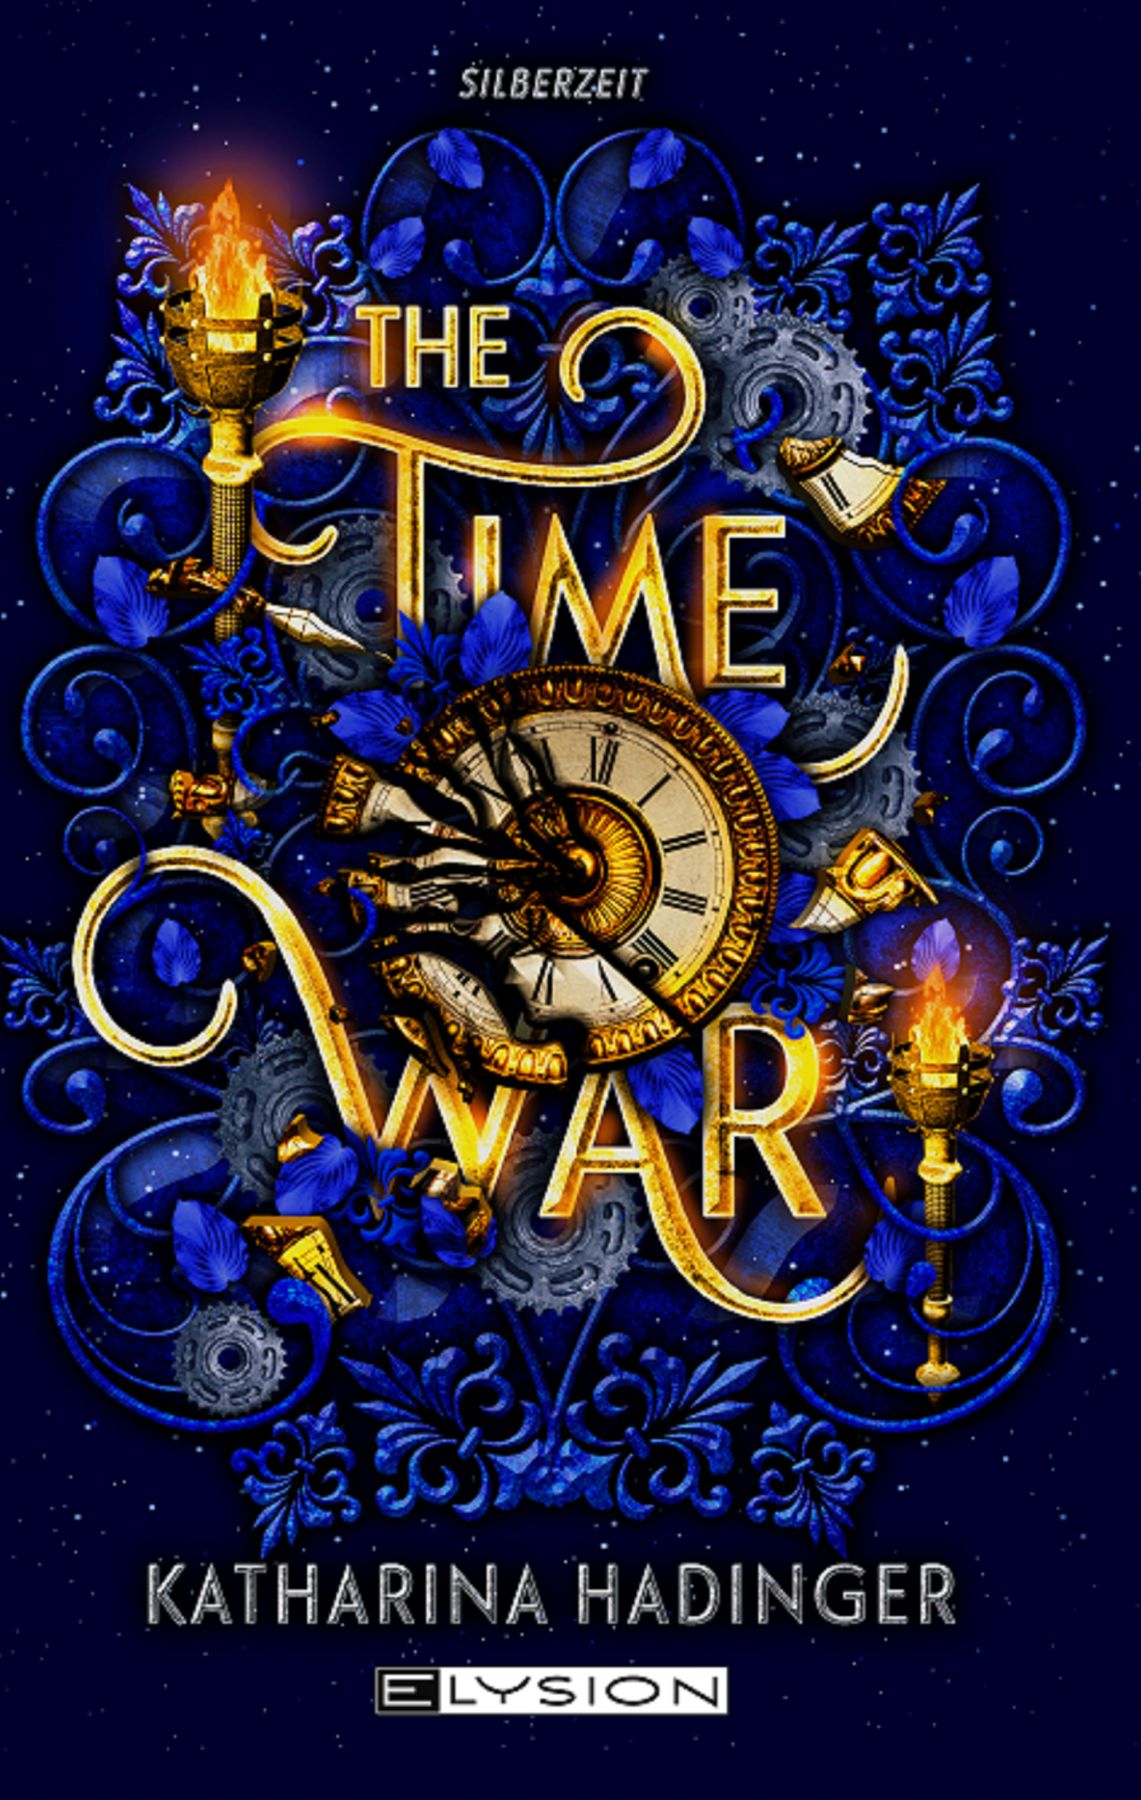 The Time Wars